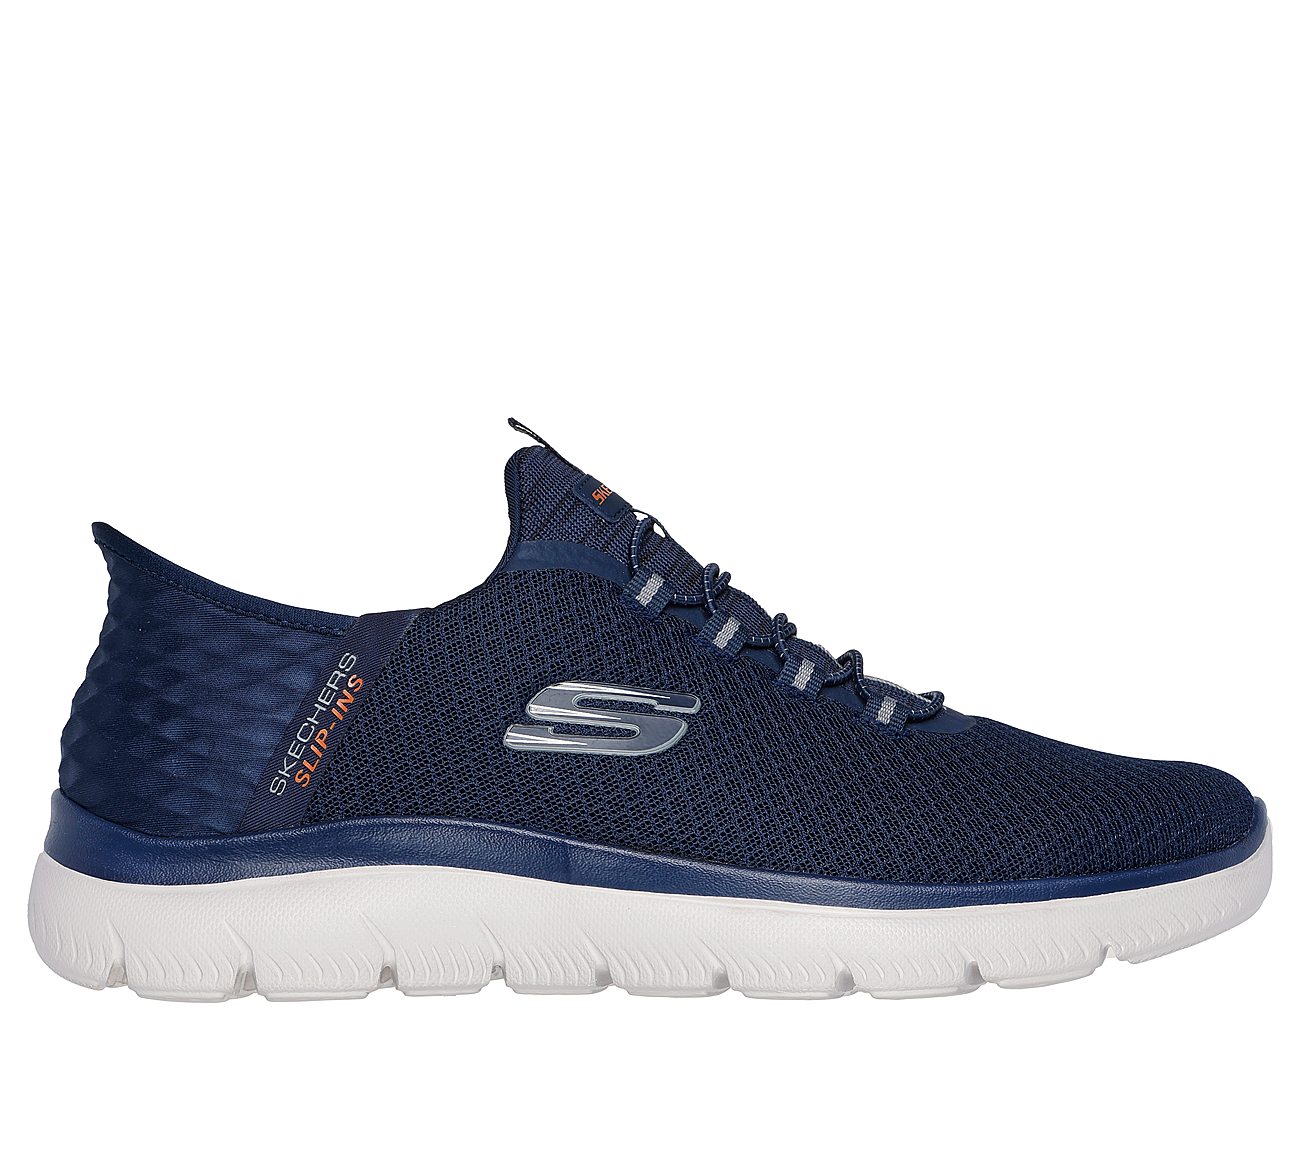 https://www.skechers.in/on/demandware.static/-/Sites-skechers_india/default/dw4a9104a7/images/large/196642387484-1.jpg